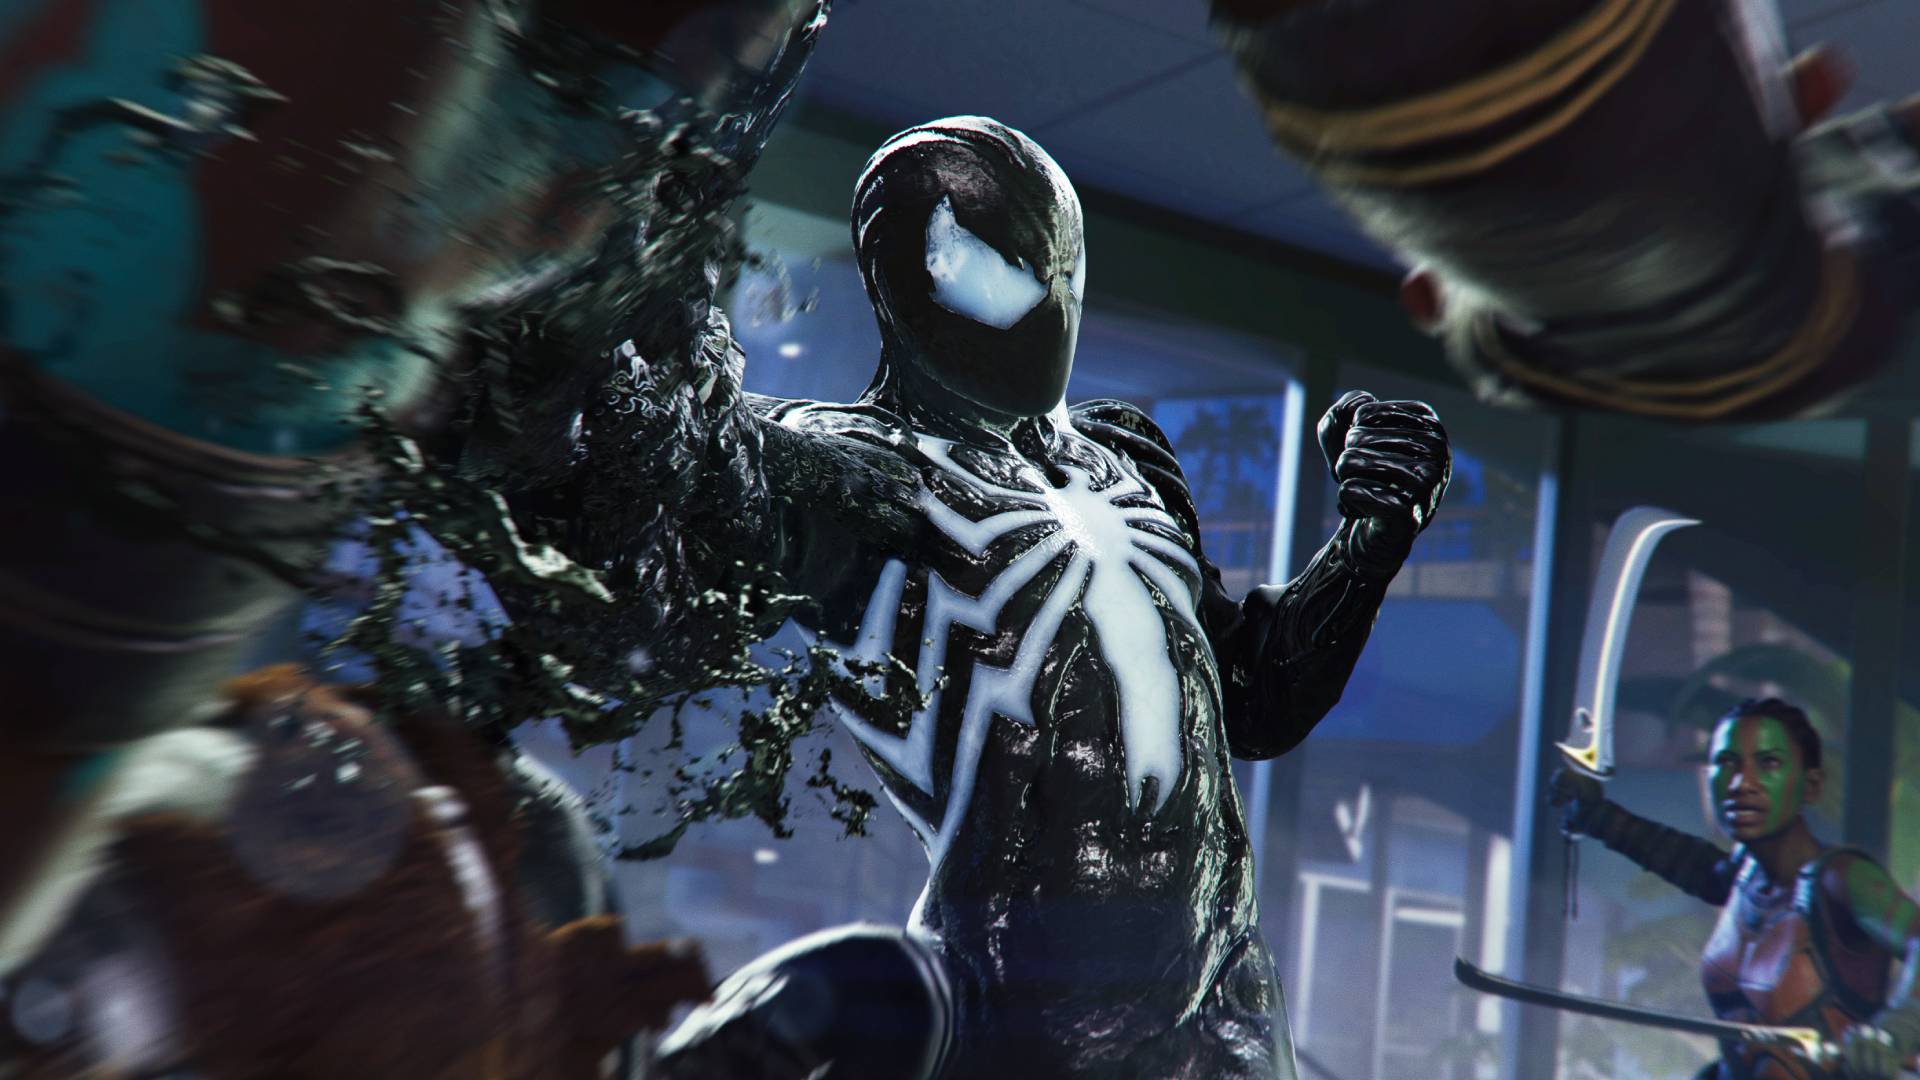 Peter in his Symbiote Suit fighting Hunters in Marvel's Spider-Man 2